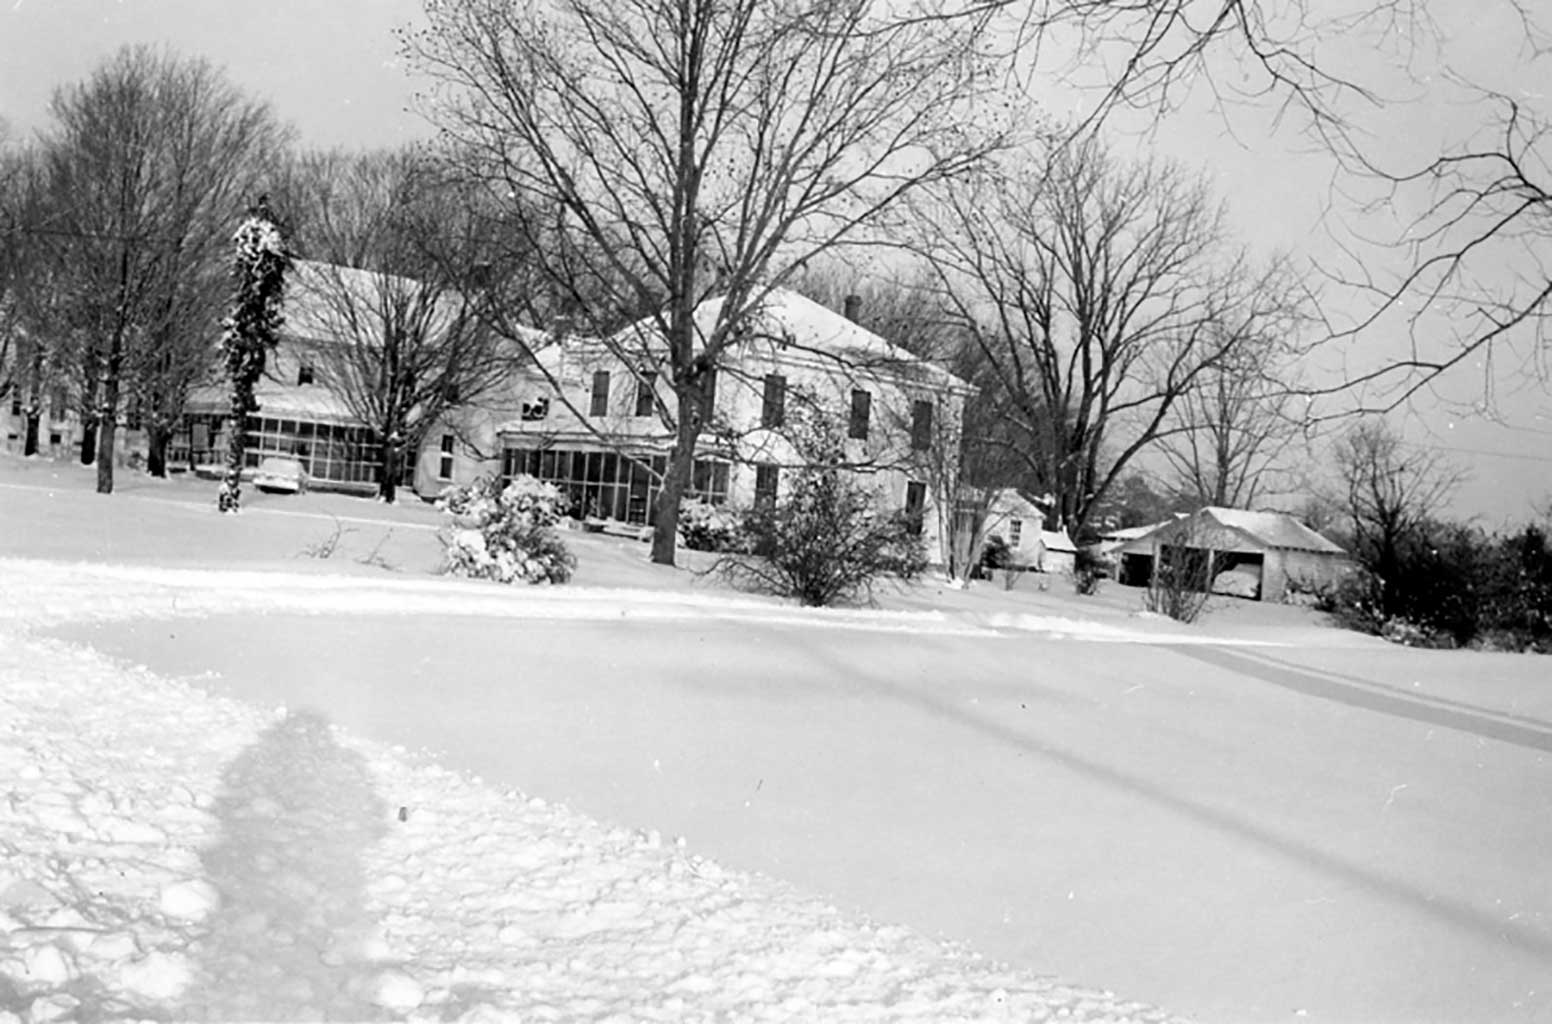 gilliam-homes-in-the-snow-in-1956-img356